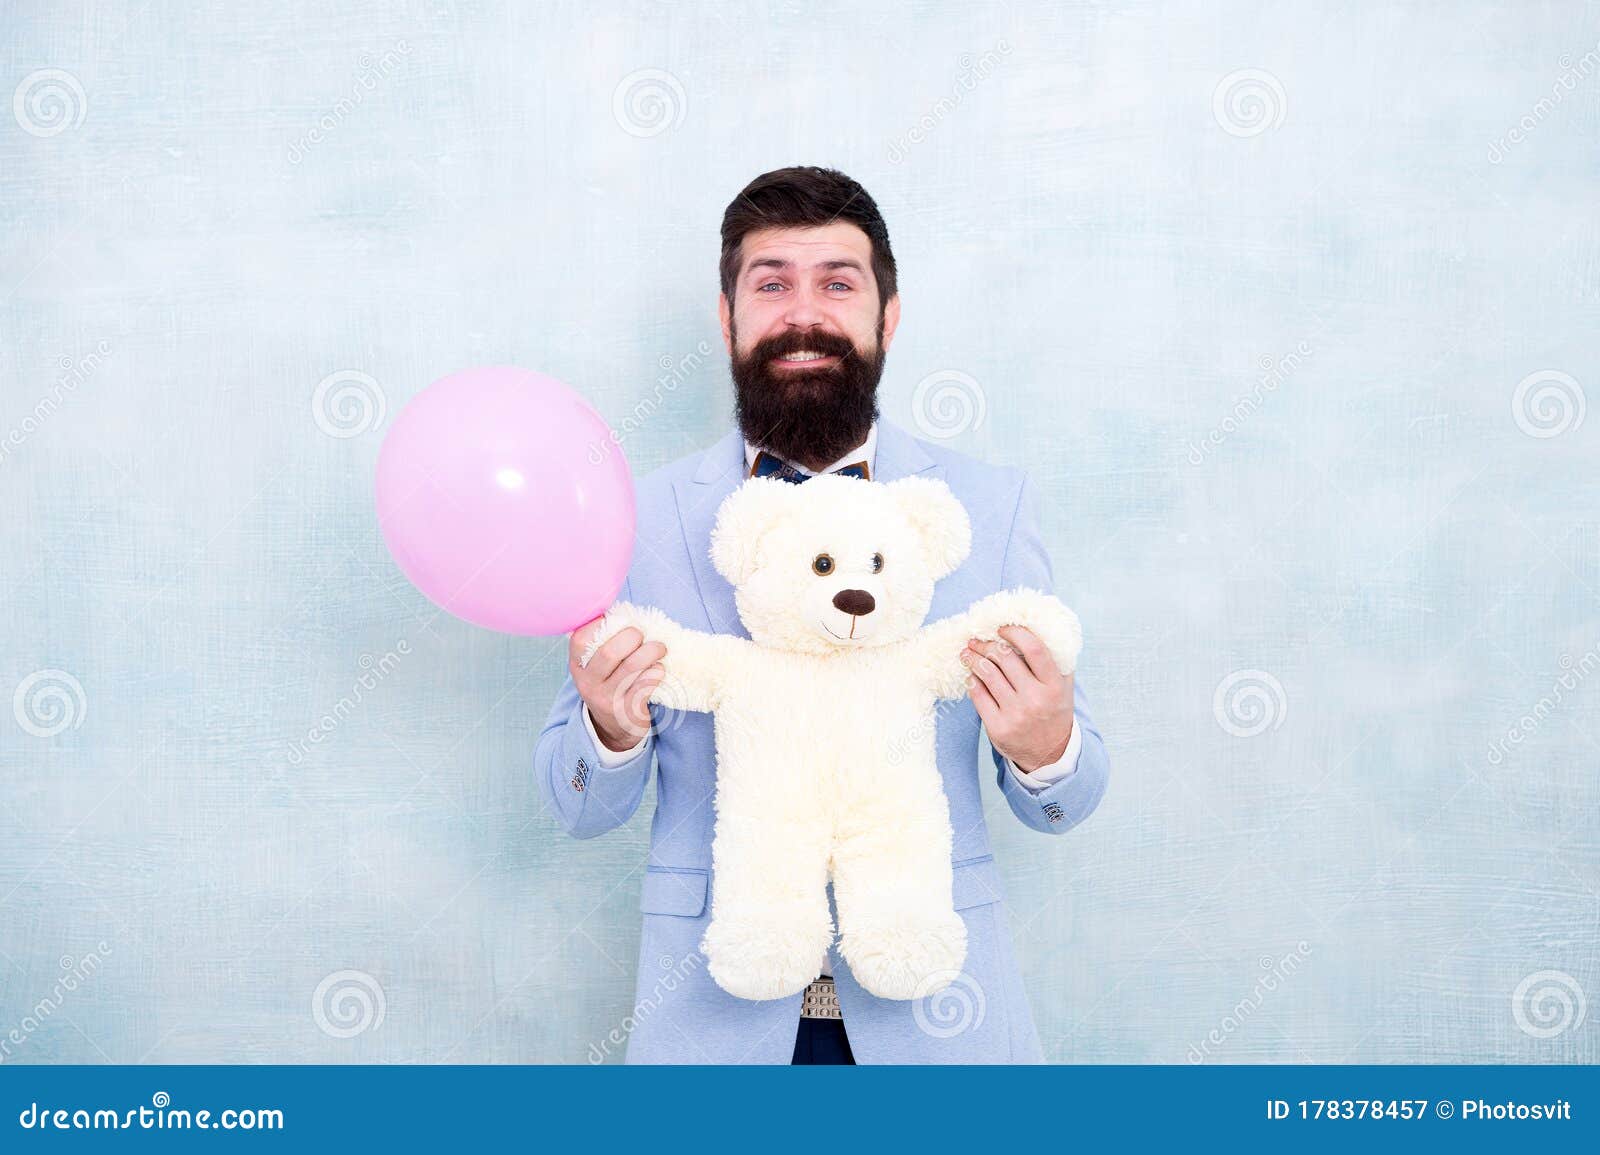 love is in the air. romantic man in tuxedo bow tie. gift with love. stereotypical presents. romantic man with teddy bear